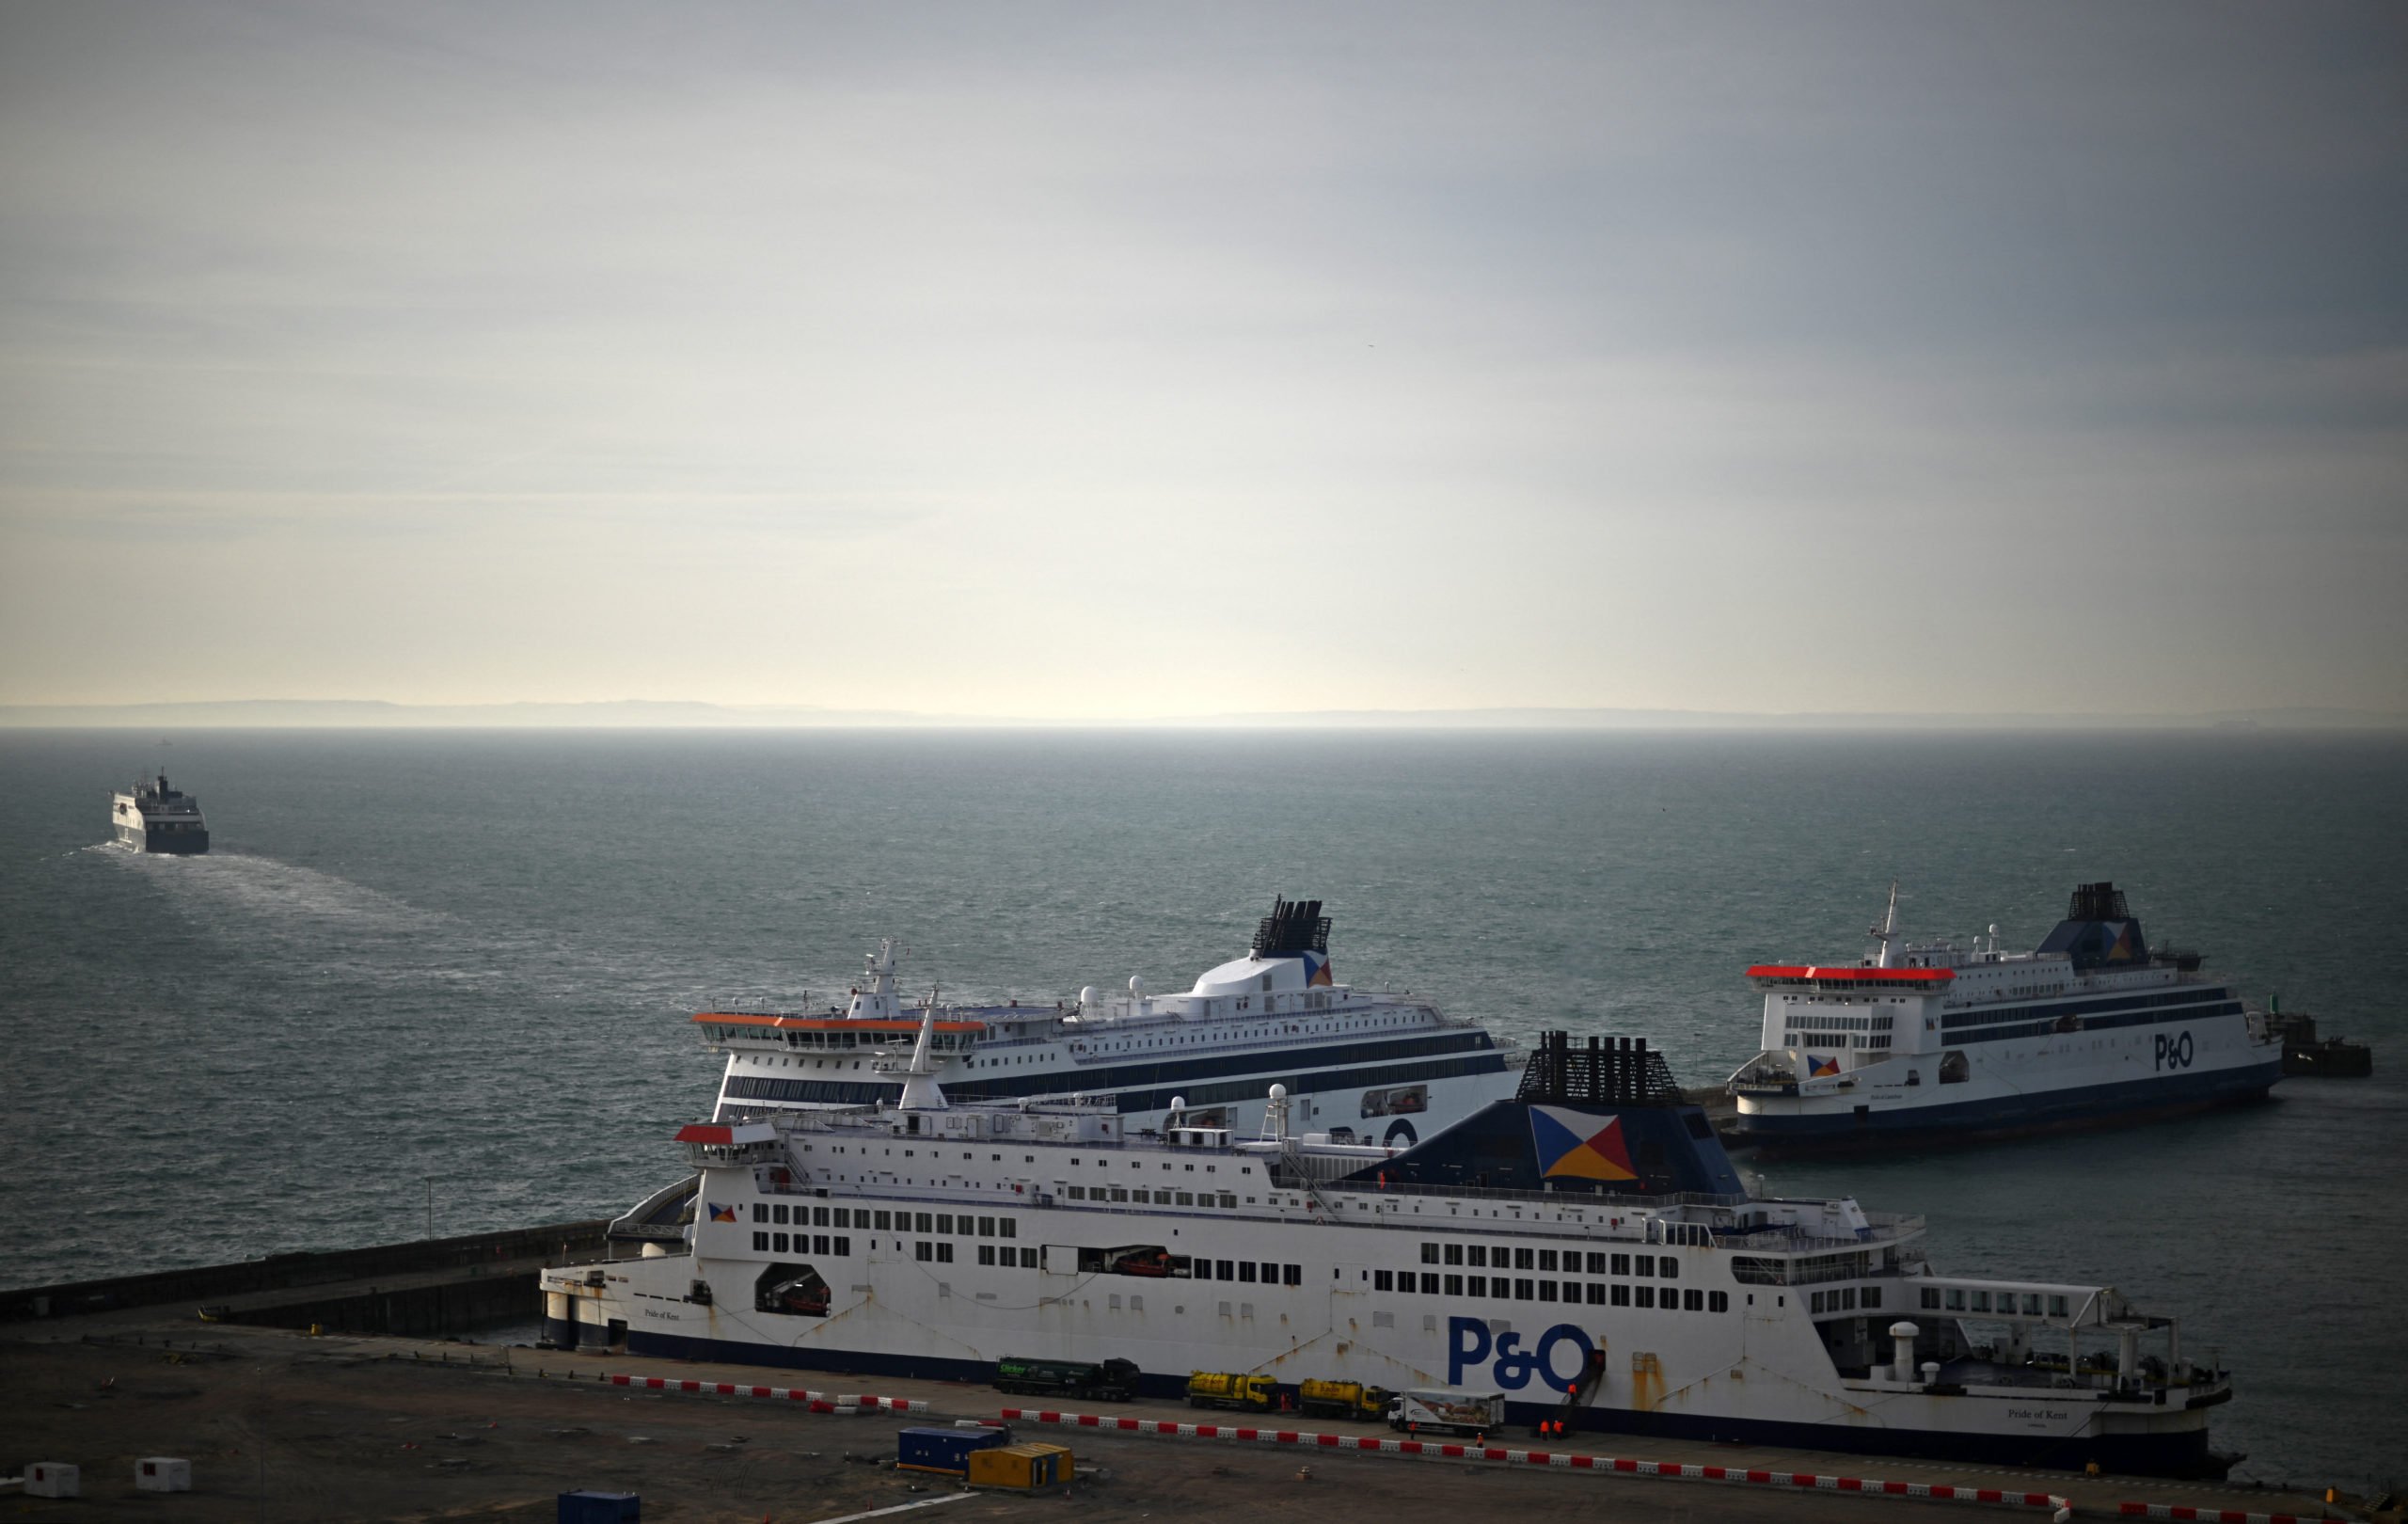 The ferry company P&O's decision to lay off 800 staff members has caused chaos for holidaymakers.